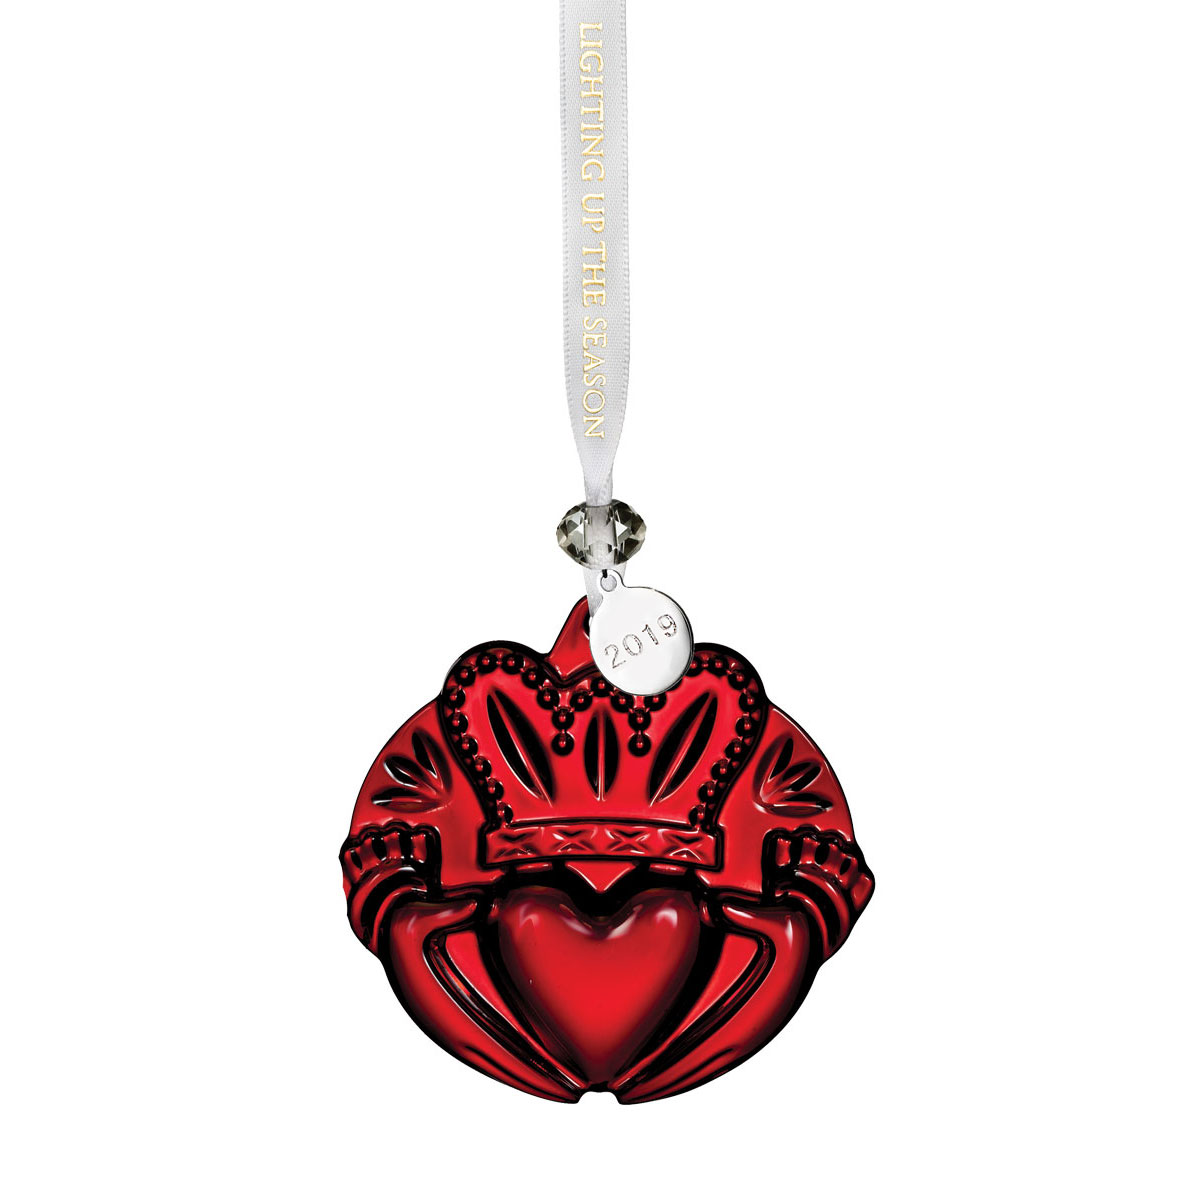 Waterford 2019 Claddagh Ornament, Red